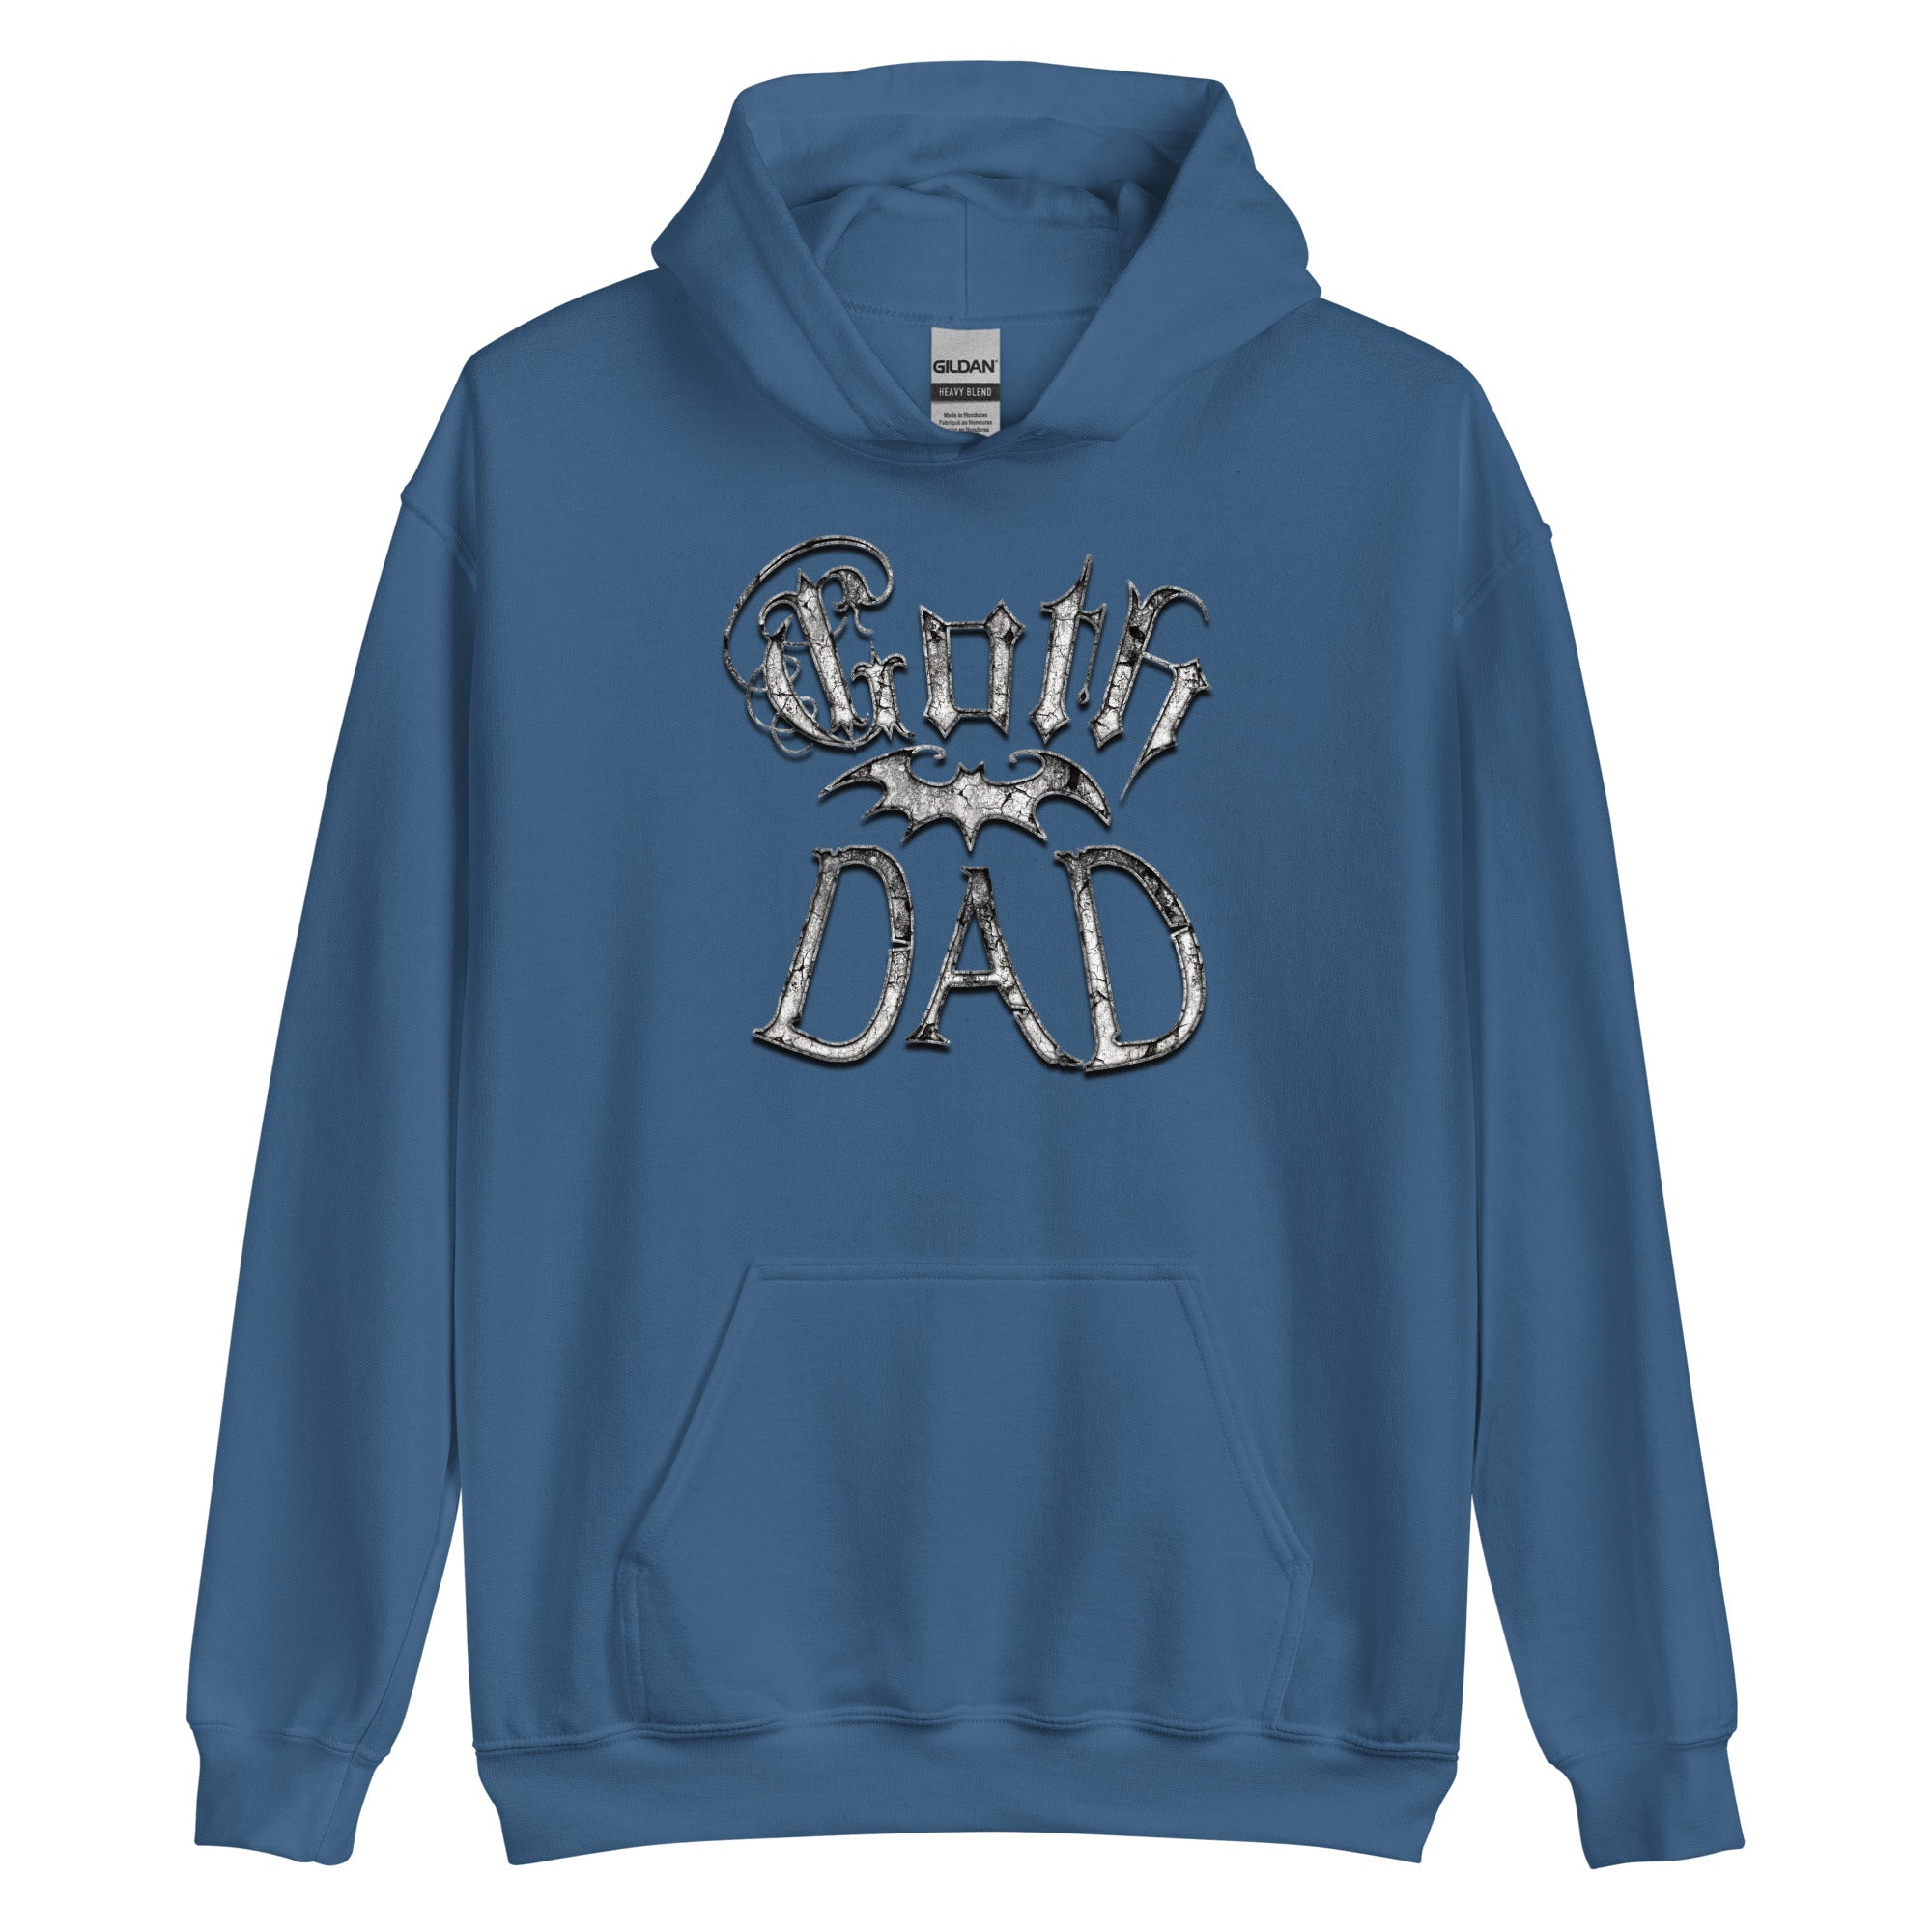 White Goth Dad with Bat Father's Day Gift Pullover Hoodie Sweatshirt